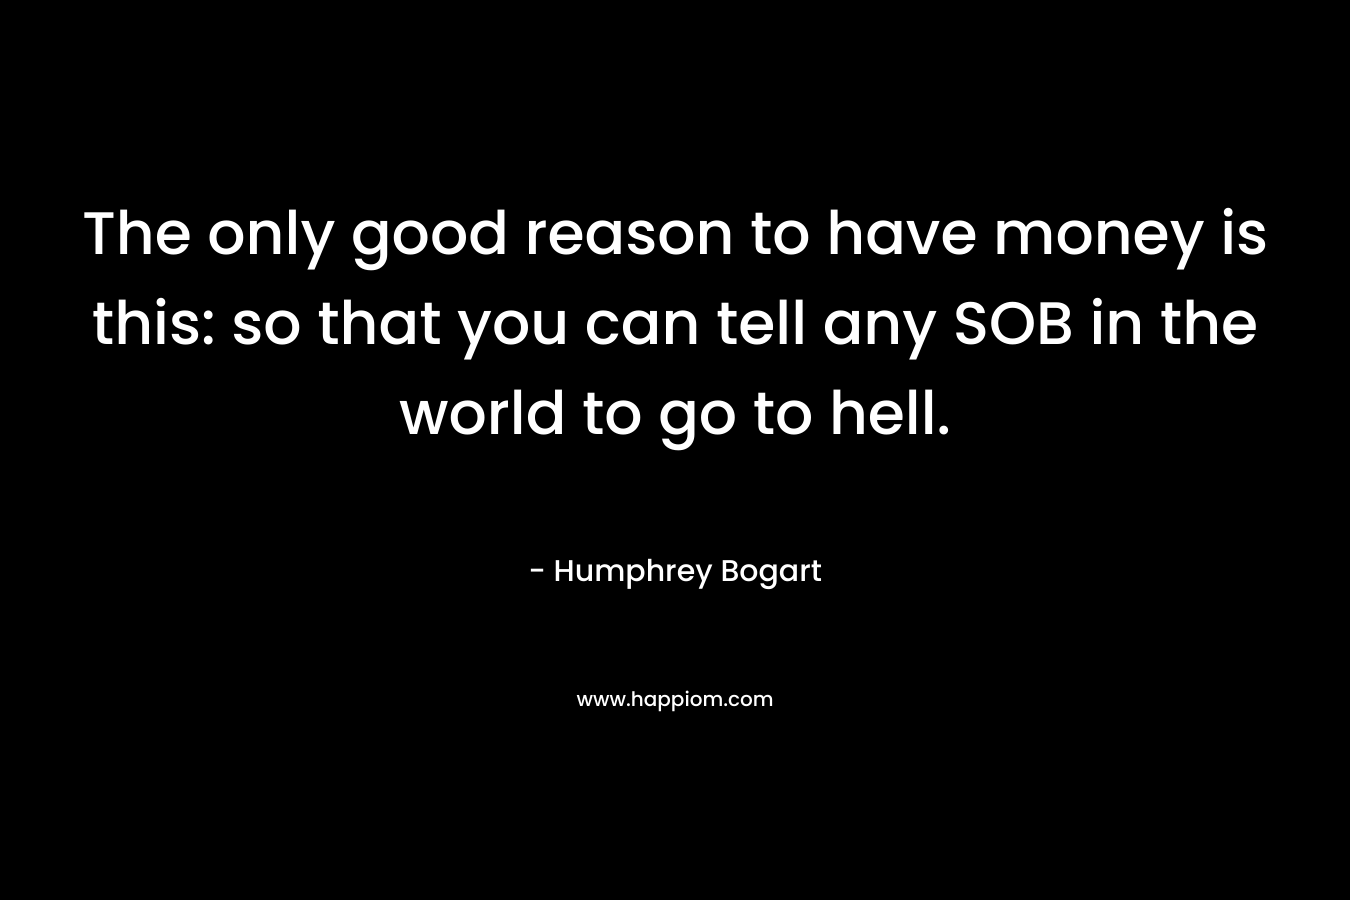 The only good reason to have money is this: so that you can tell any SOB in the world to go to hell. – Humphrey Bogart